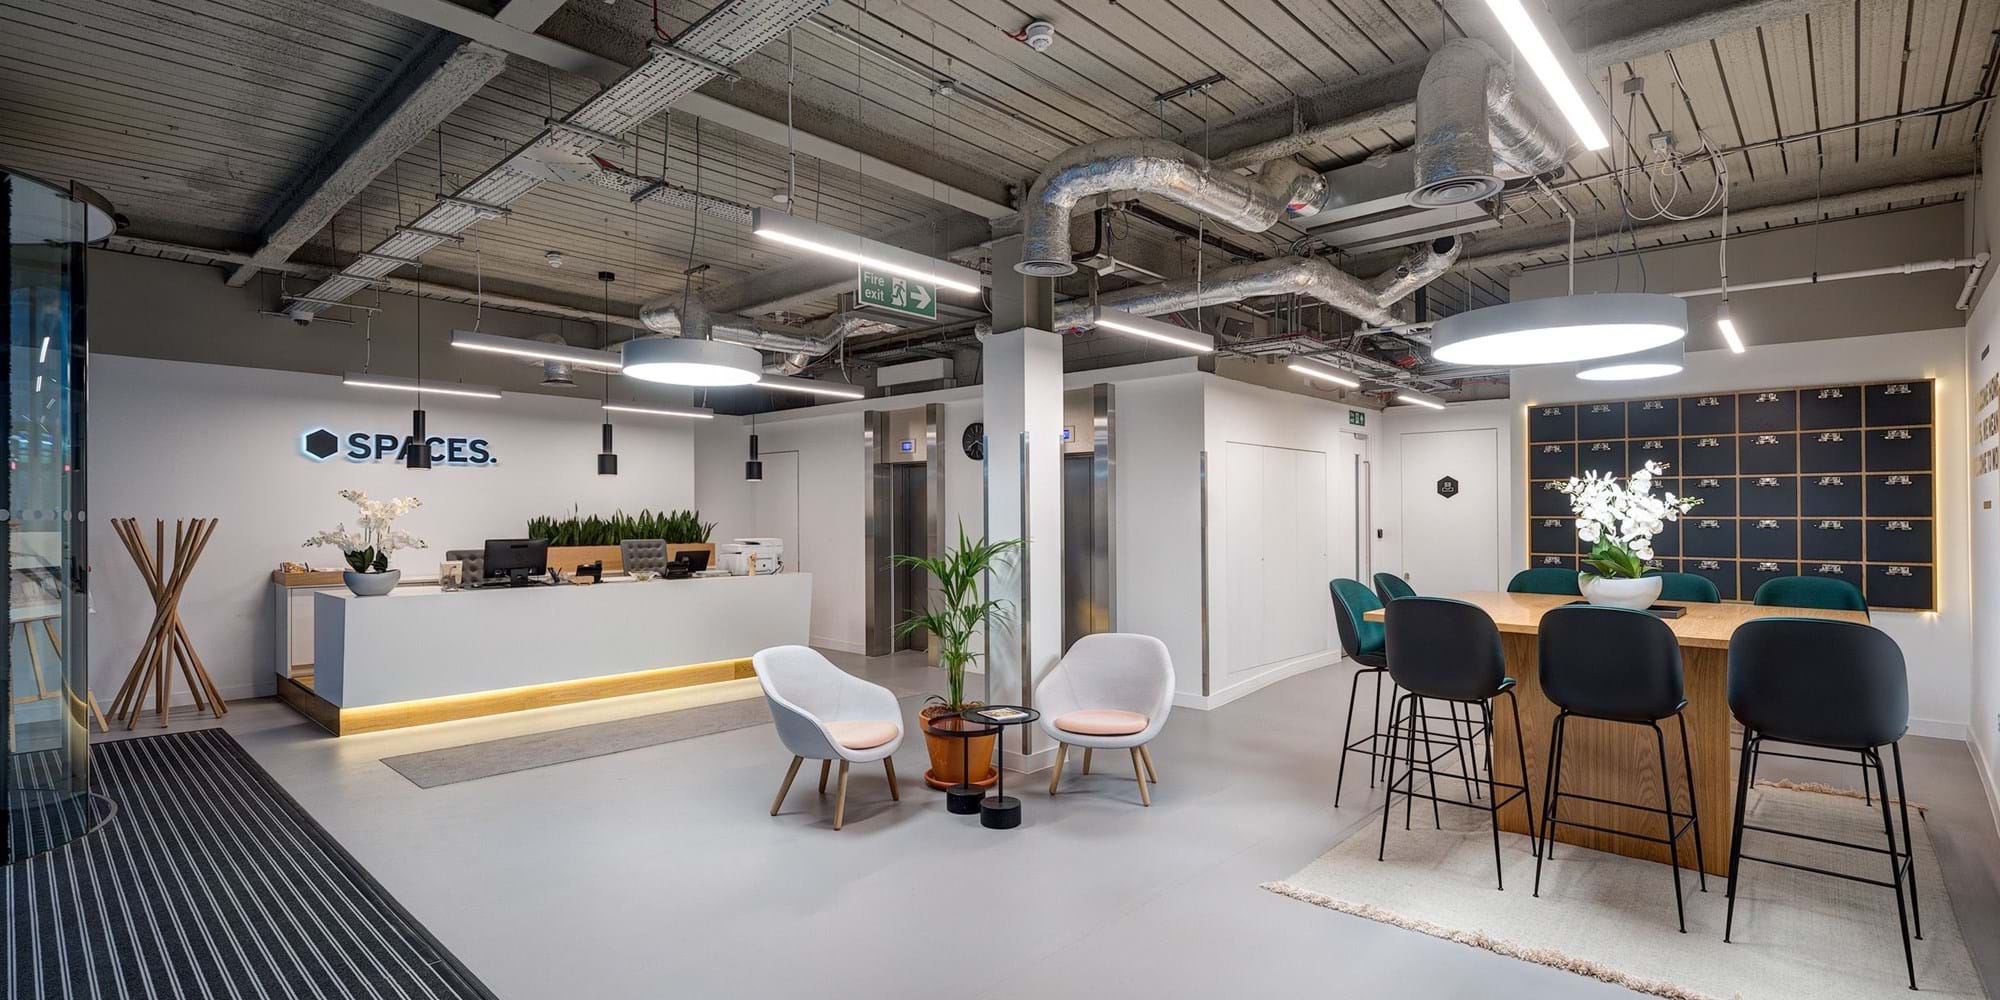 Modus Workspace office design, fit out and refurbishment - Spaces - Moorgate, London - Spaces Moorgate 01 highres sRGB.jpg